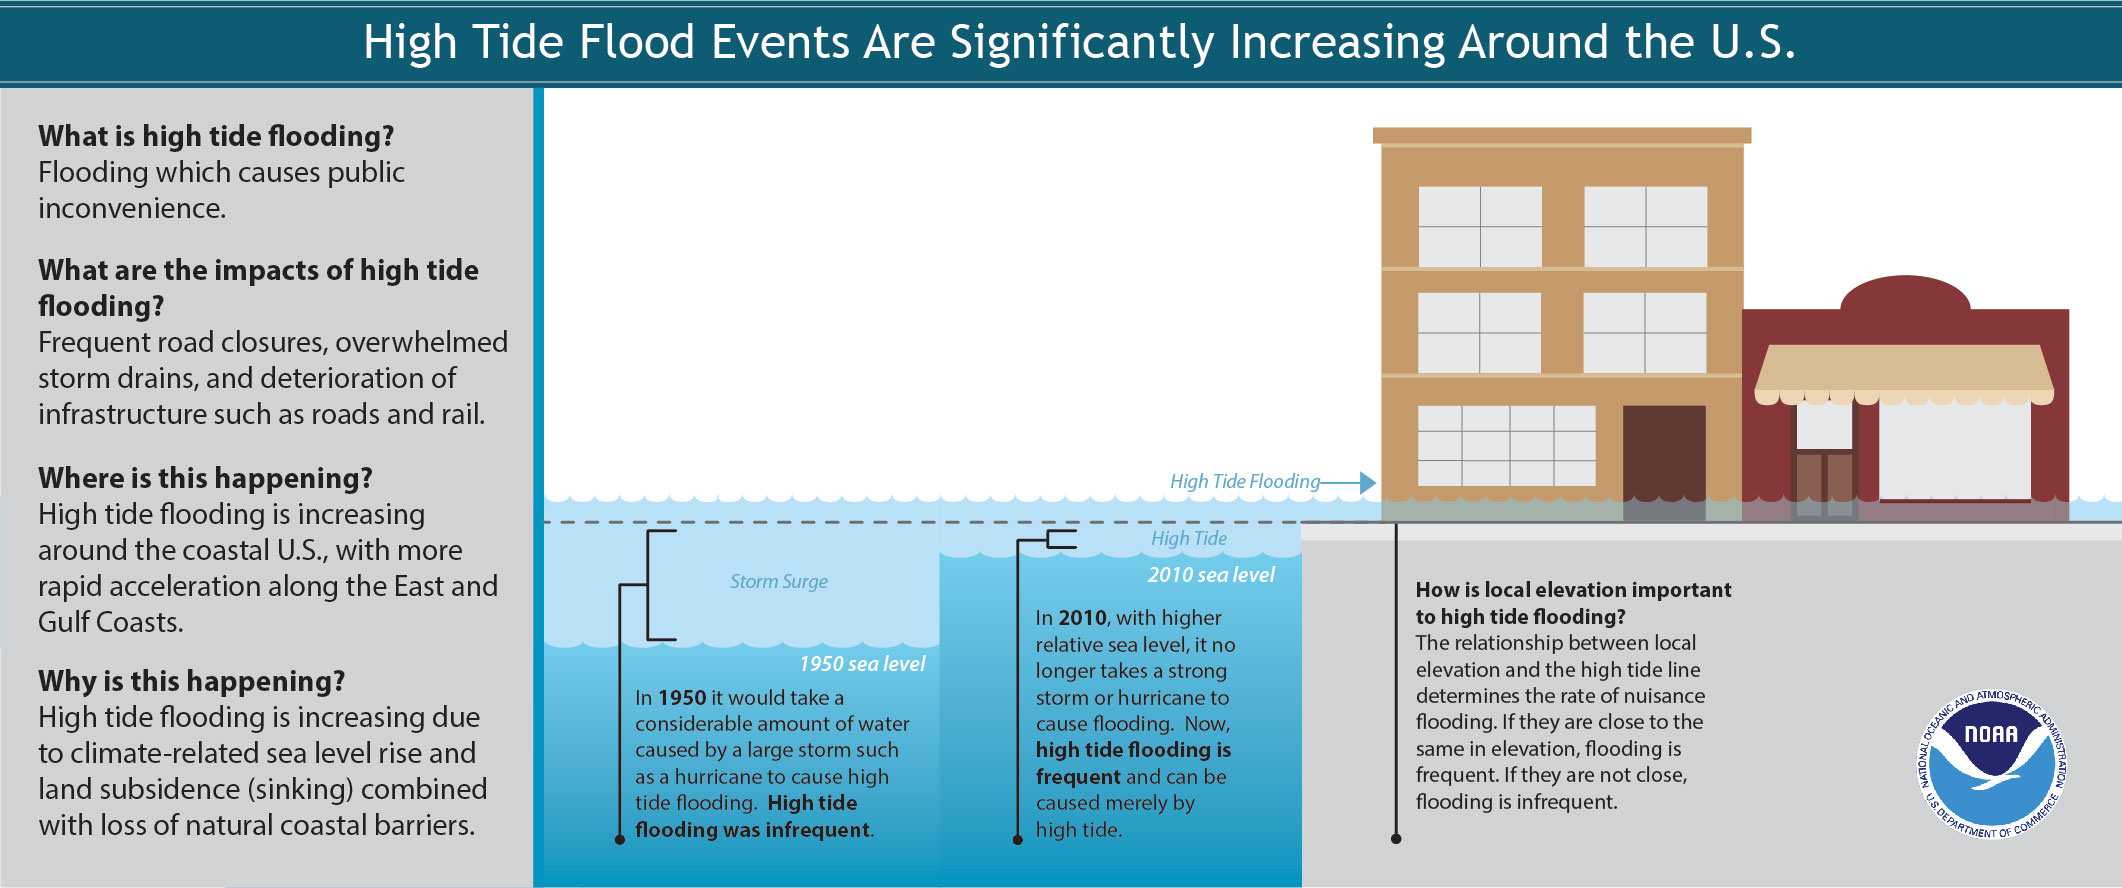 NOAA High Tide Flooding Infographic